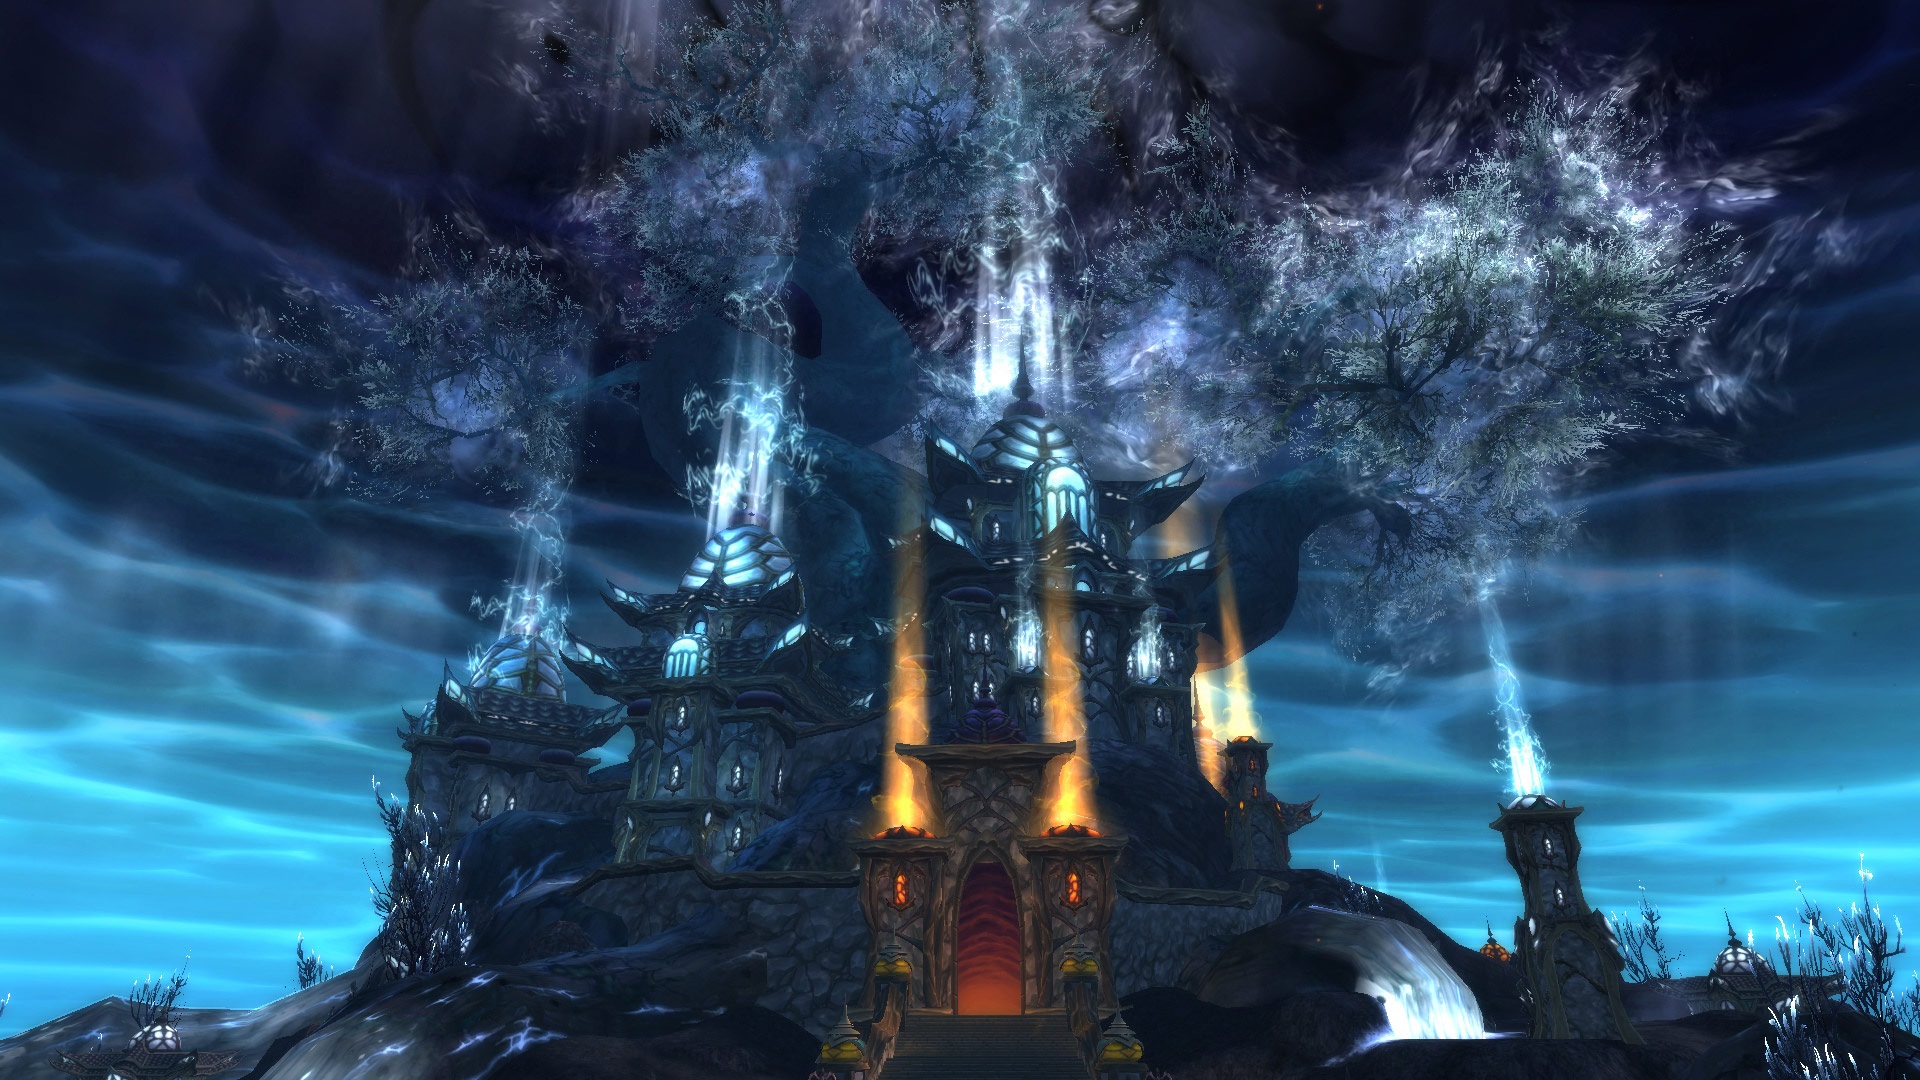 World of Warcraft: Mists of Pandaria HD wallpapers #2 - 1920x1080